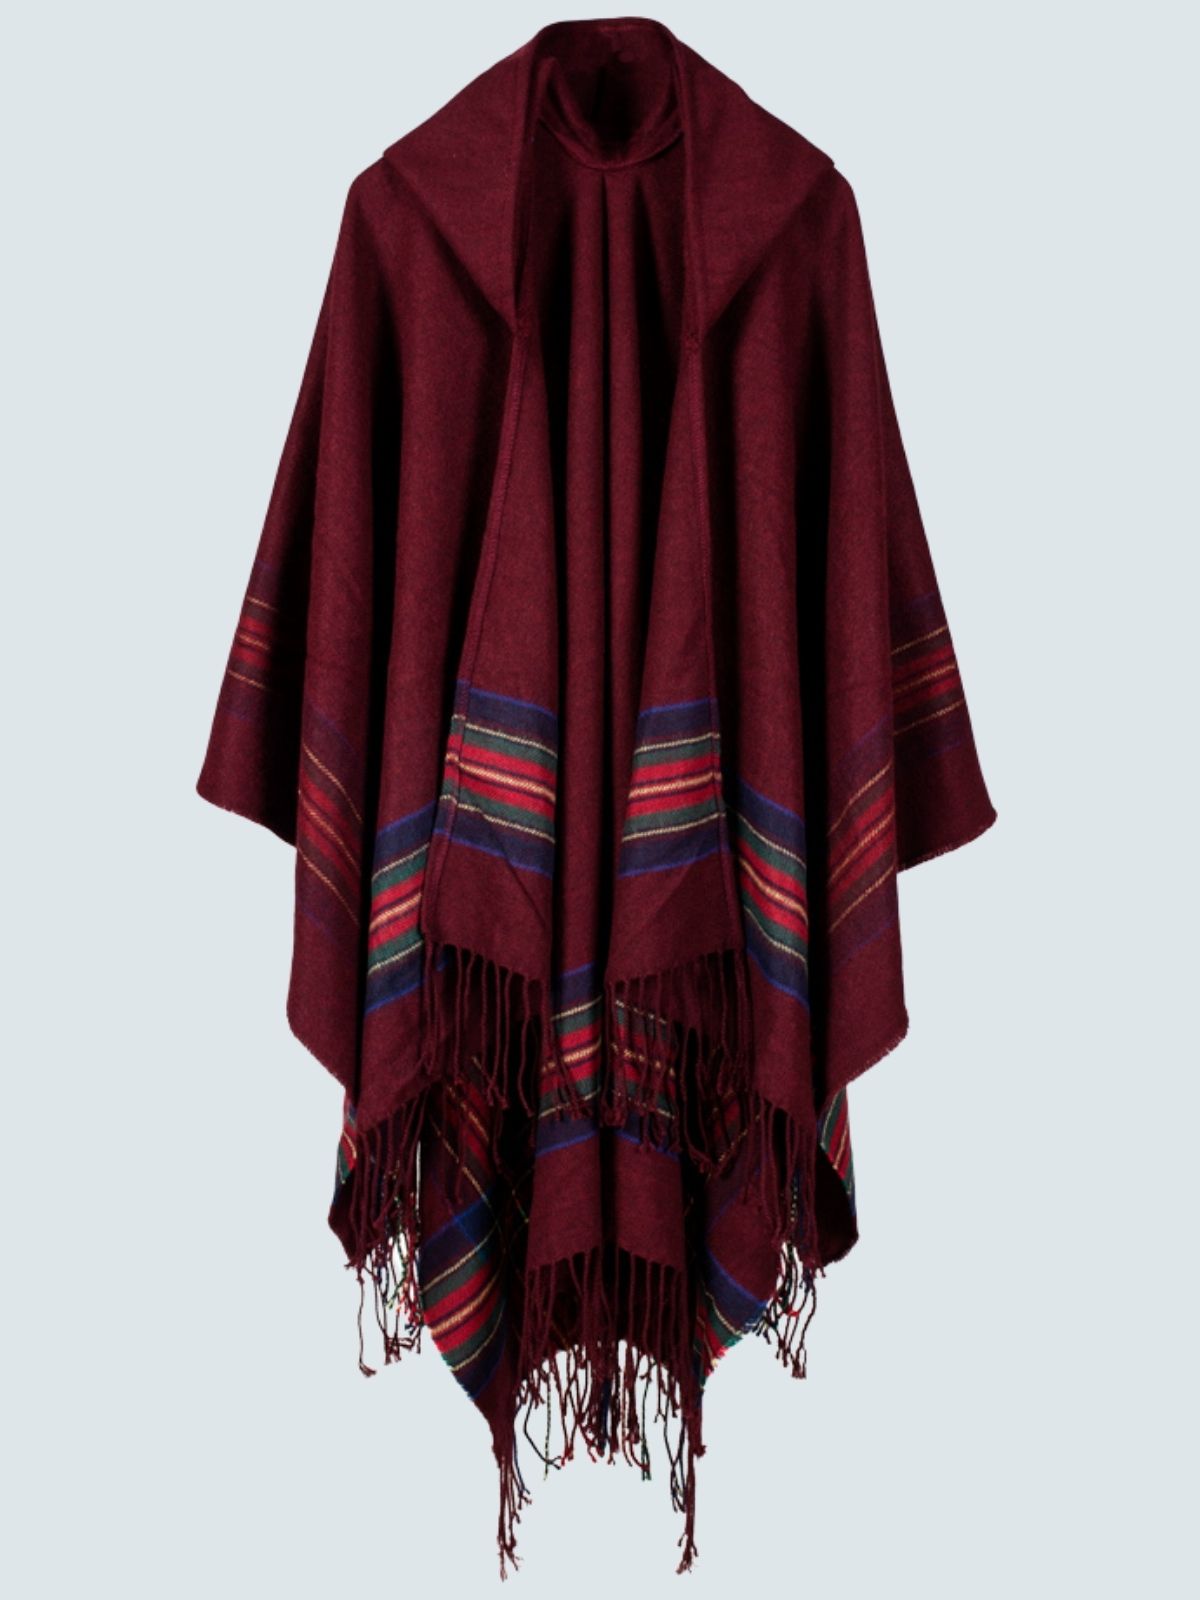 Women's Picturesque Hooded Poncho Cardigan Burgundy